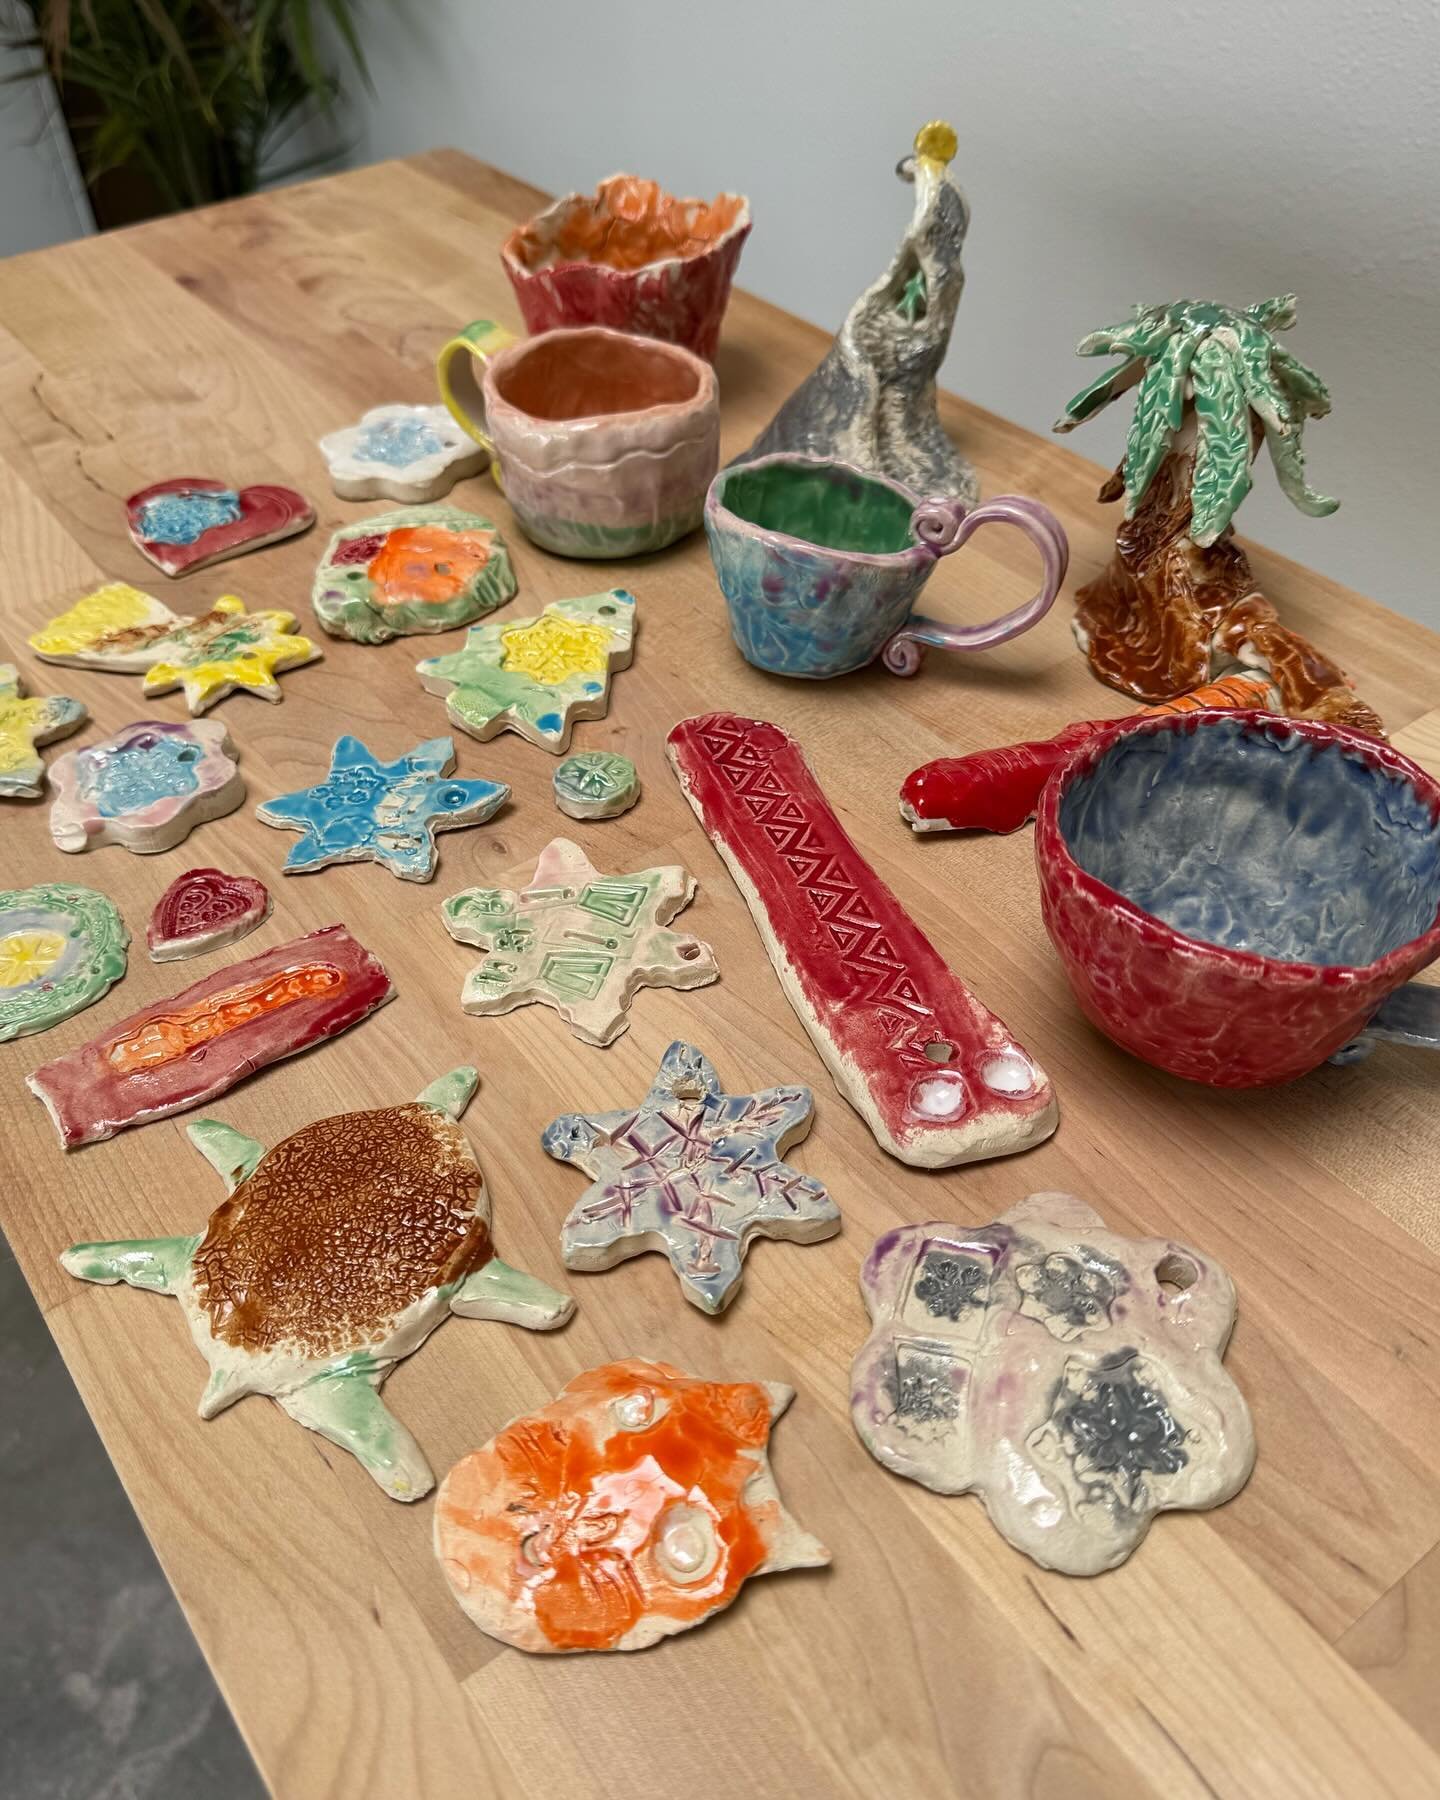 We&rsquo;re loving our youth program creations 🌈 Check our website for our next available youth classes! 

#costamesaceramics #costamesa #ceramicstudio #pottery #ceramics #clay